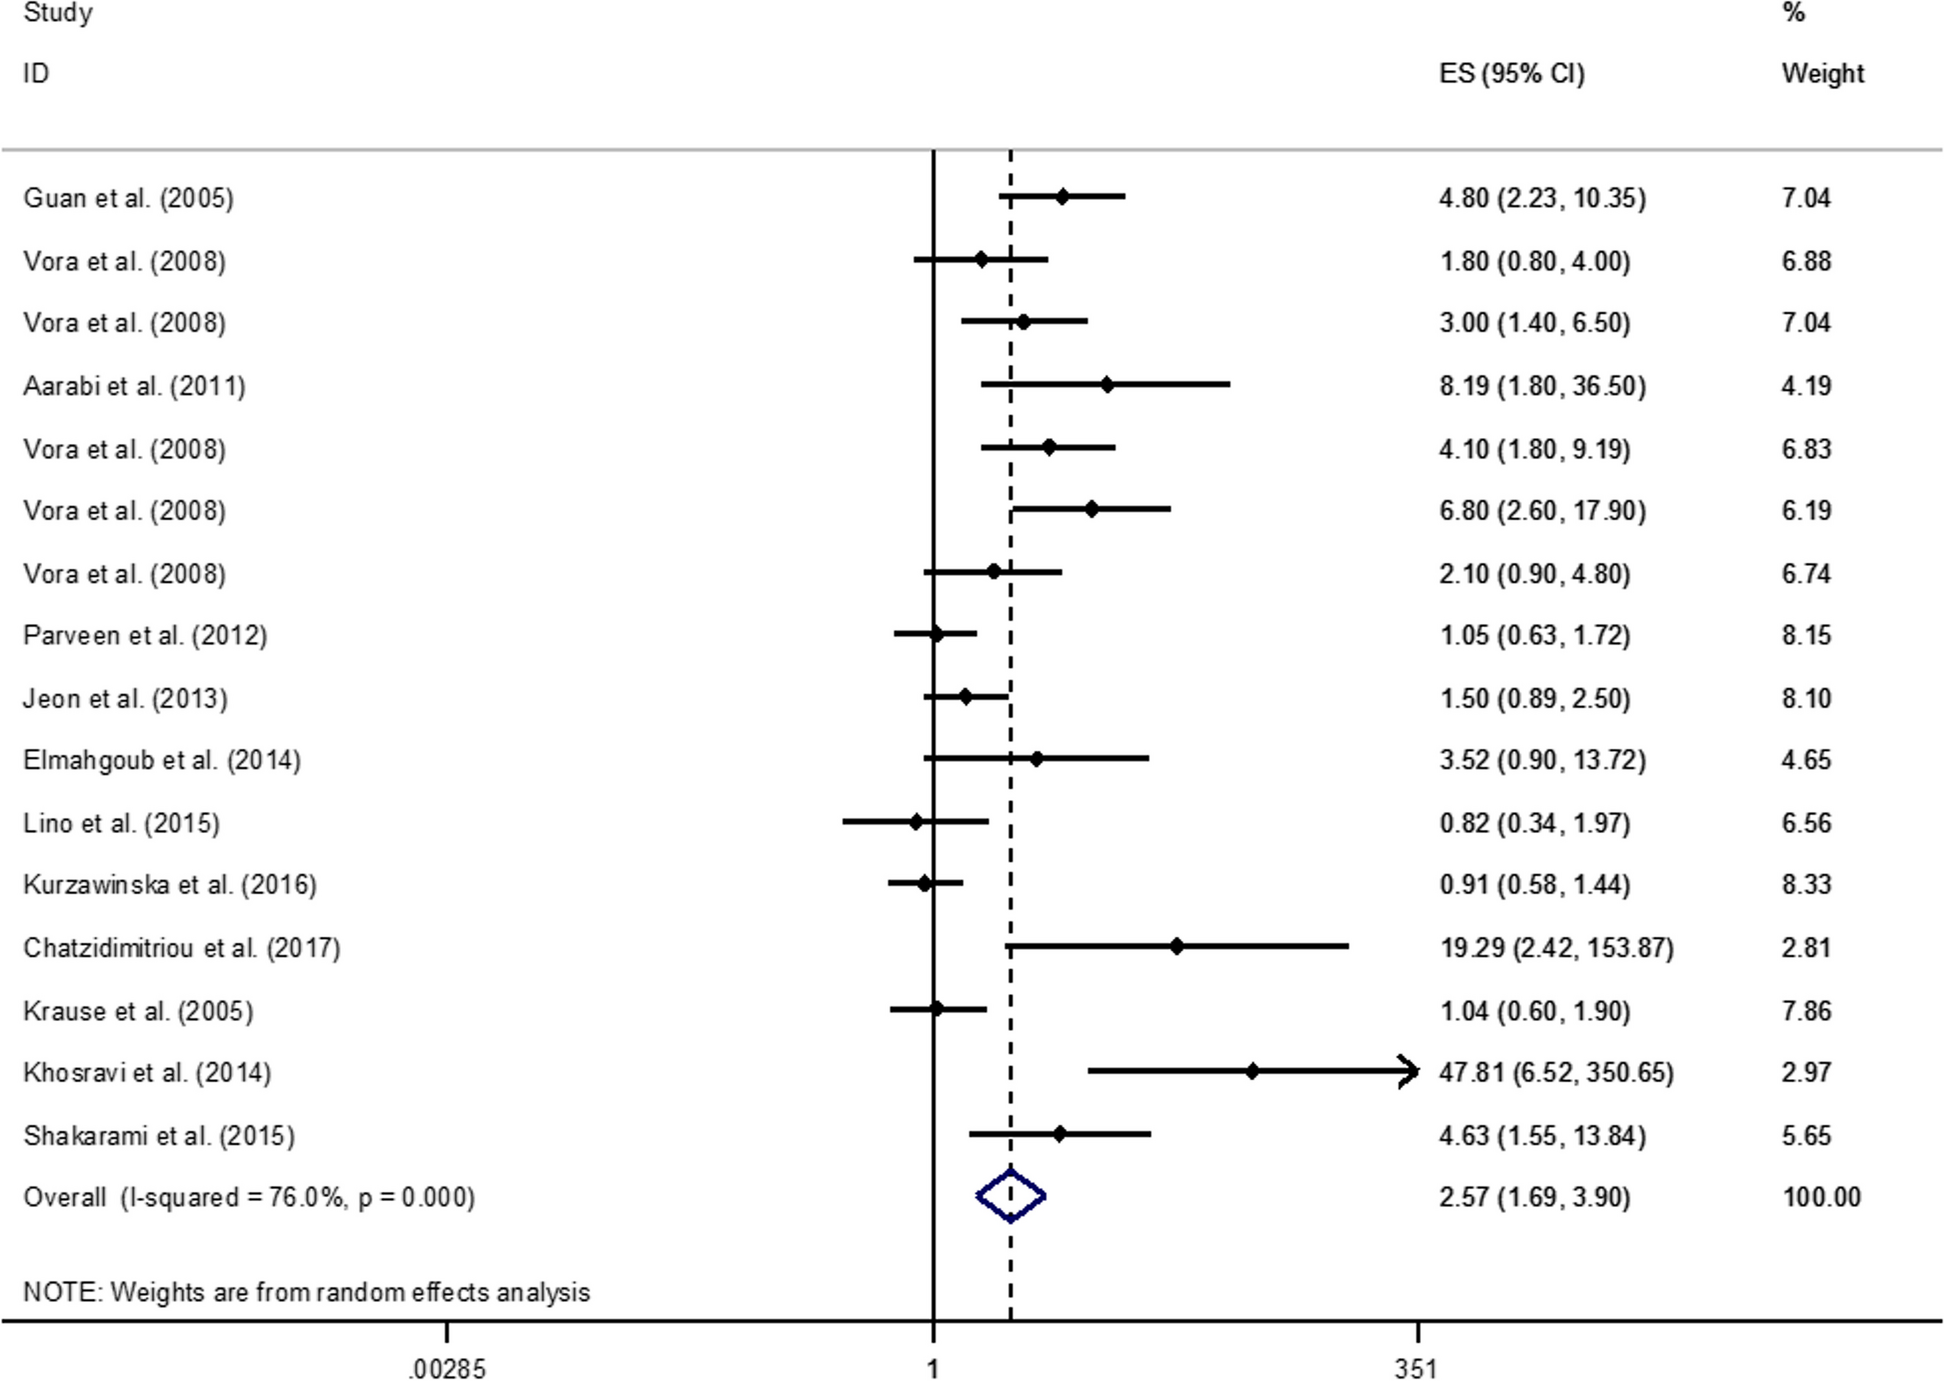 Systematic review and meta-analysis of association between plasminogen activator inhibitor-1 4G/5G polymorphism and recurrent pregnancy loss: an update